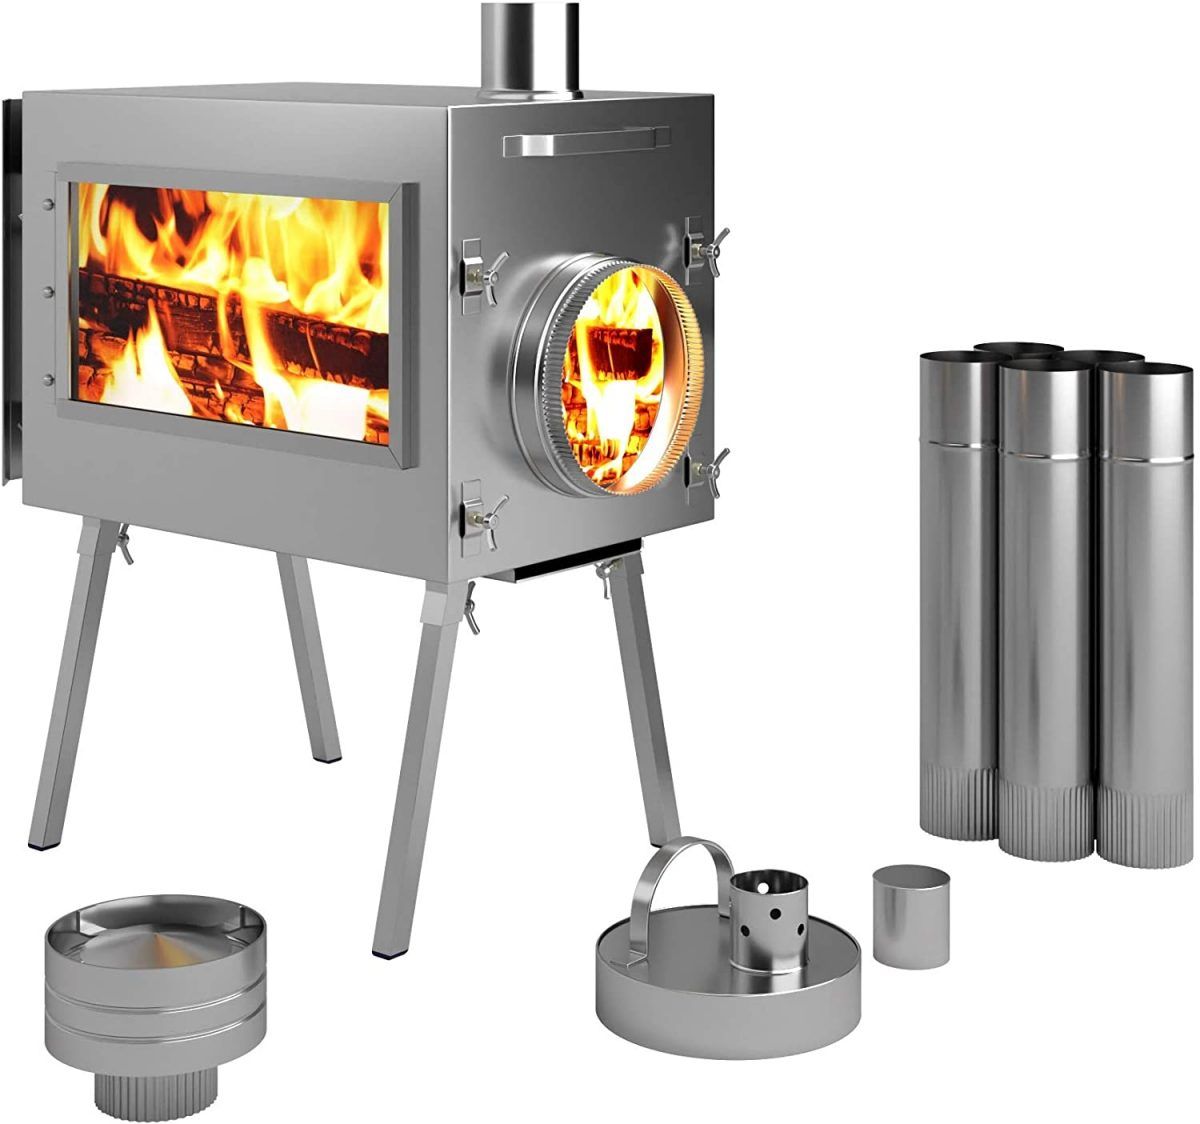 Product photo for the Russian-Bear Camping Stove.